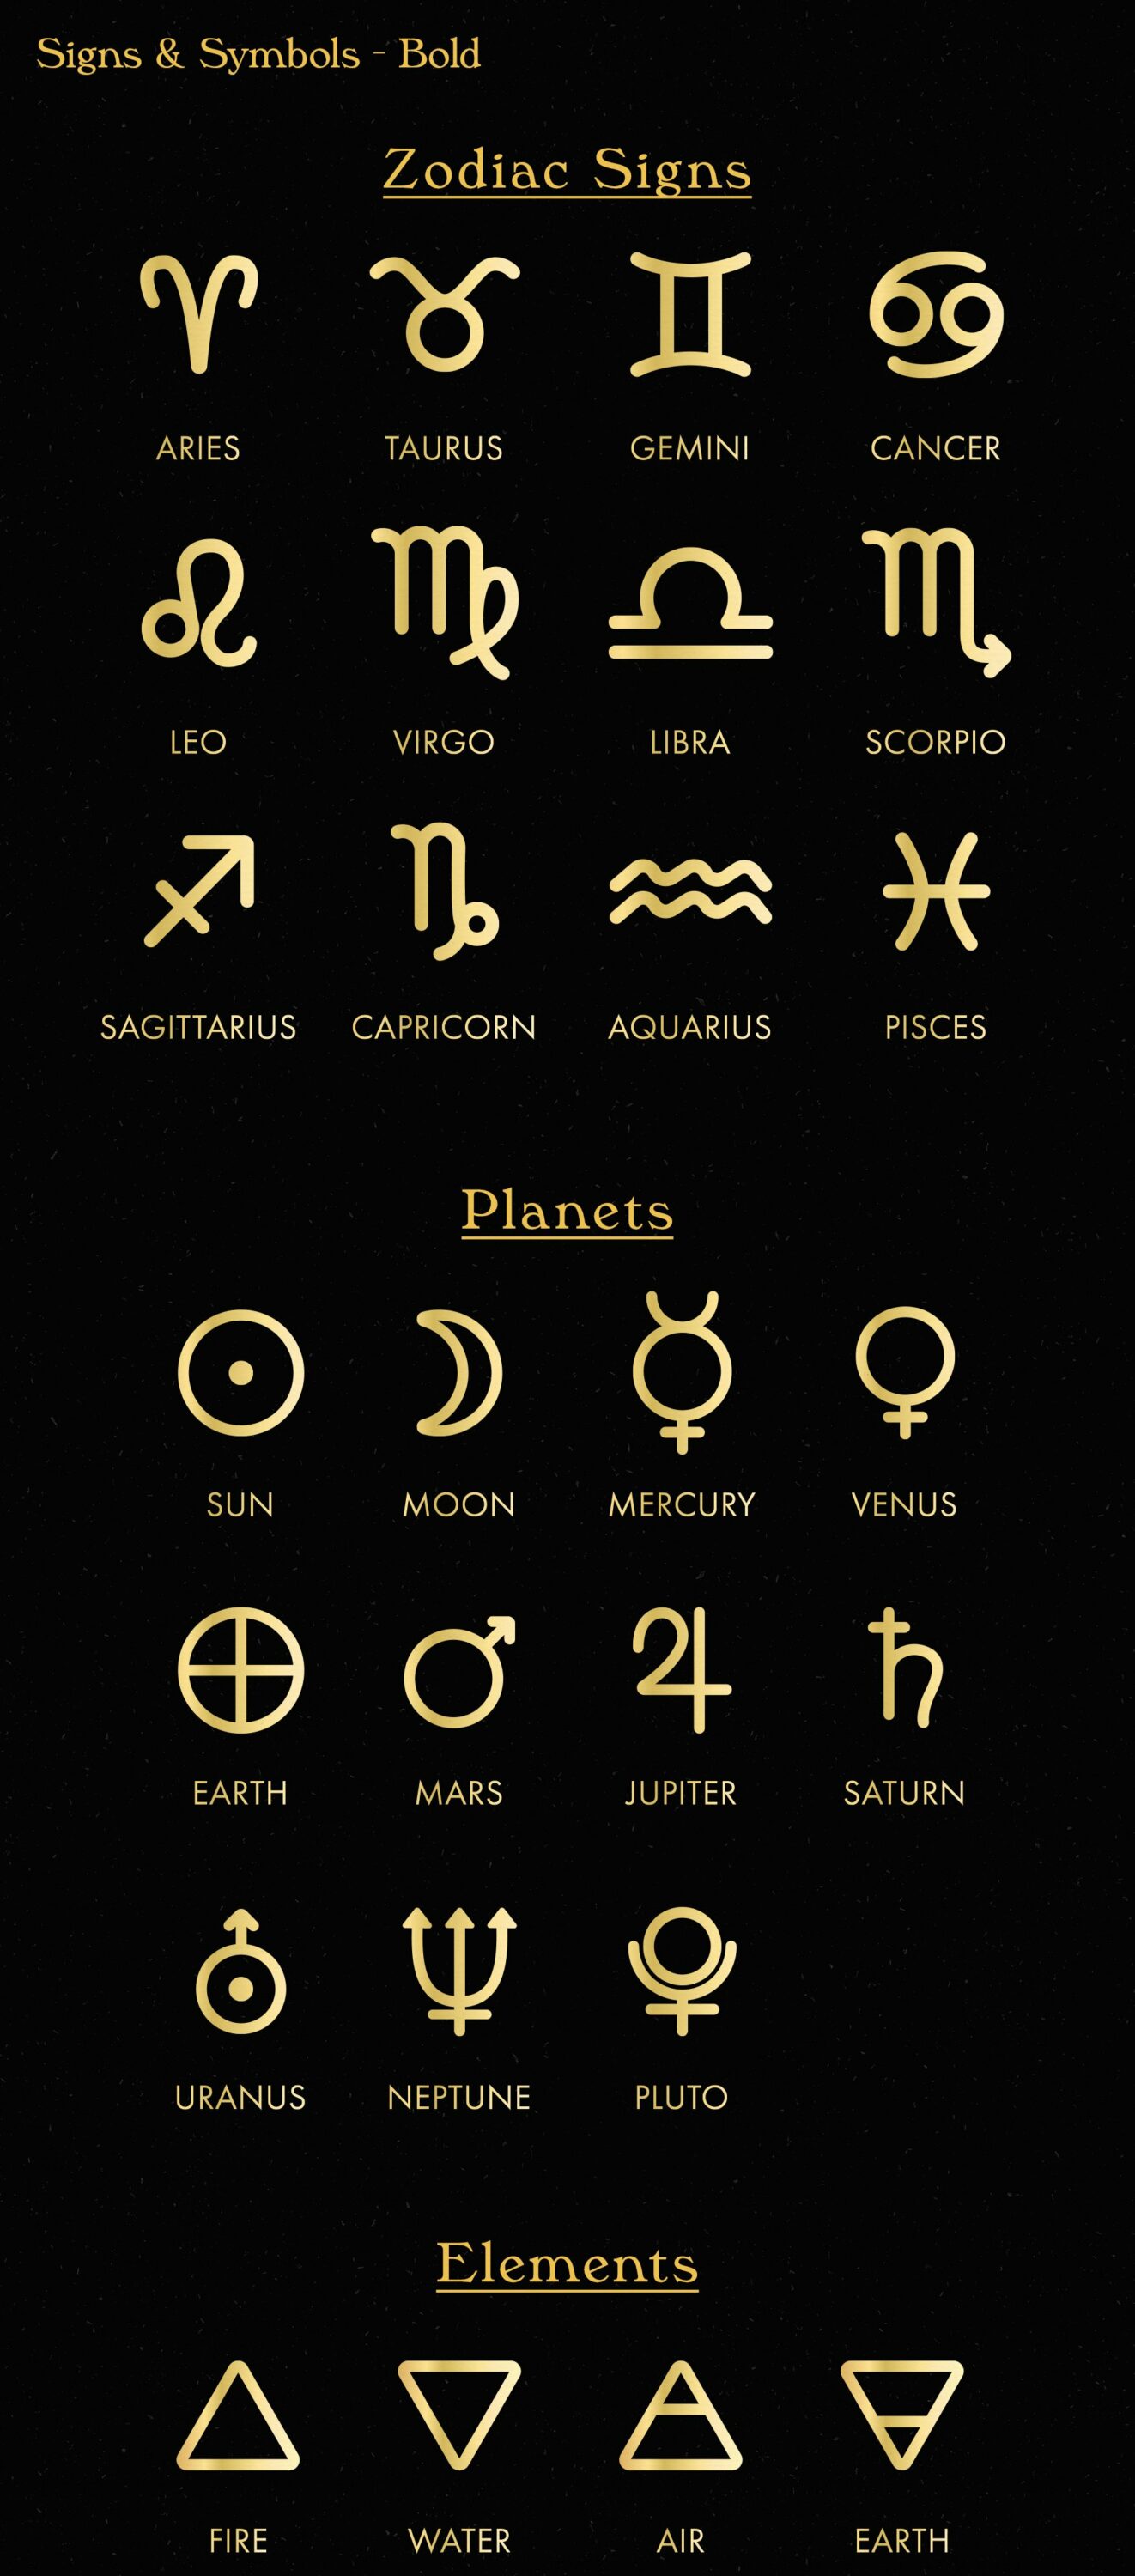 Bold signs & symbols design, golden planets and elements items.